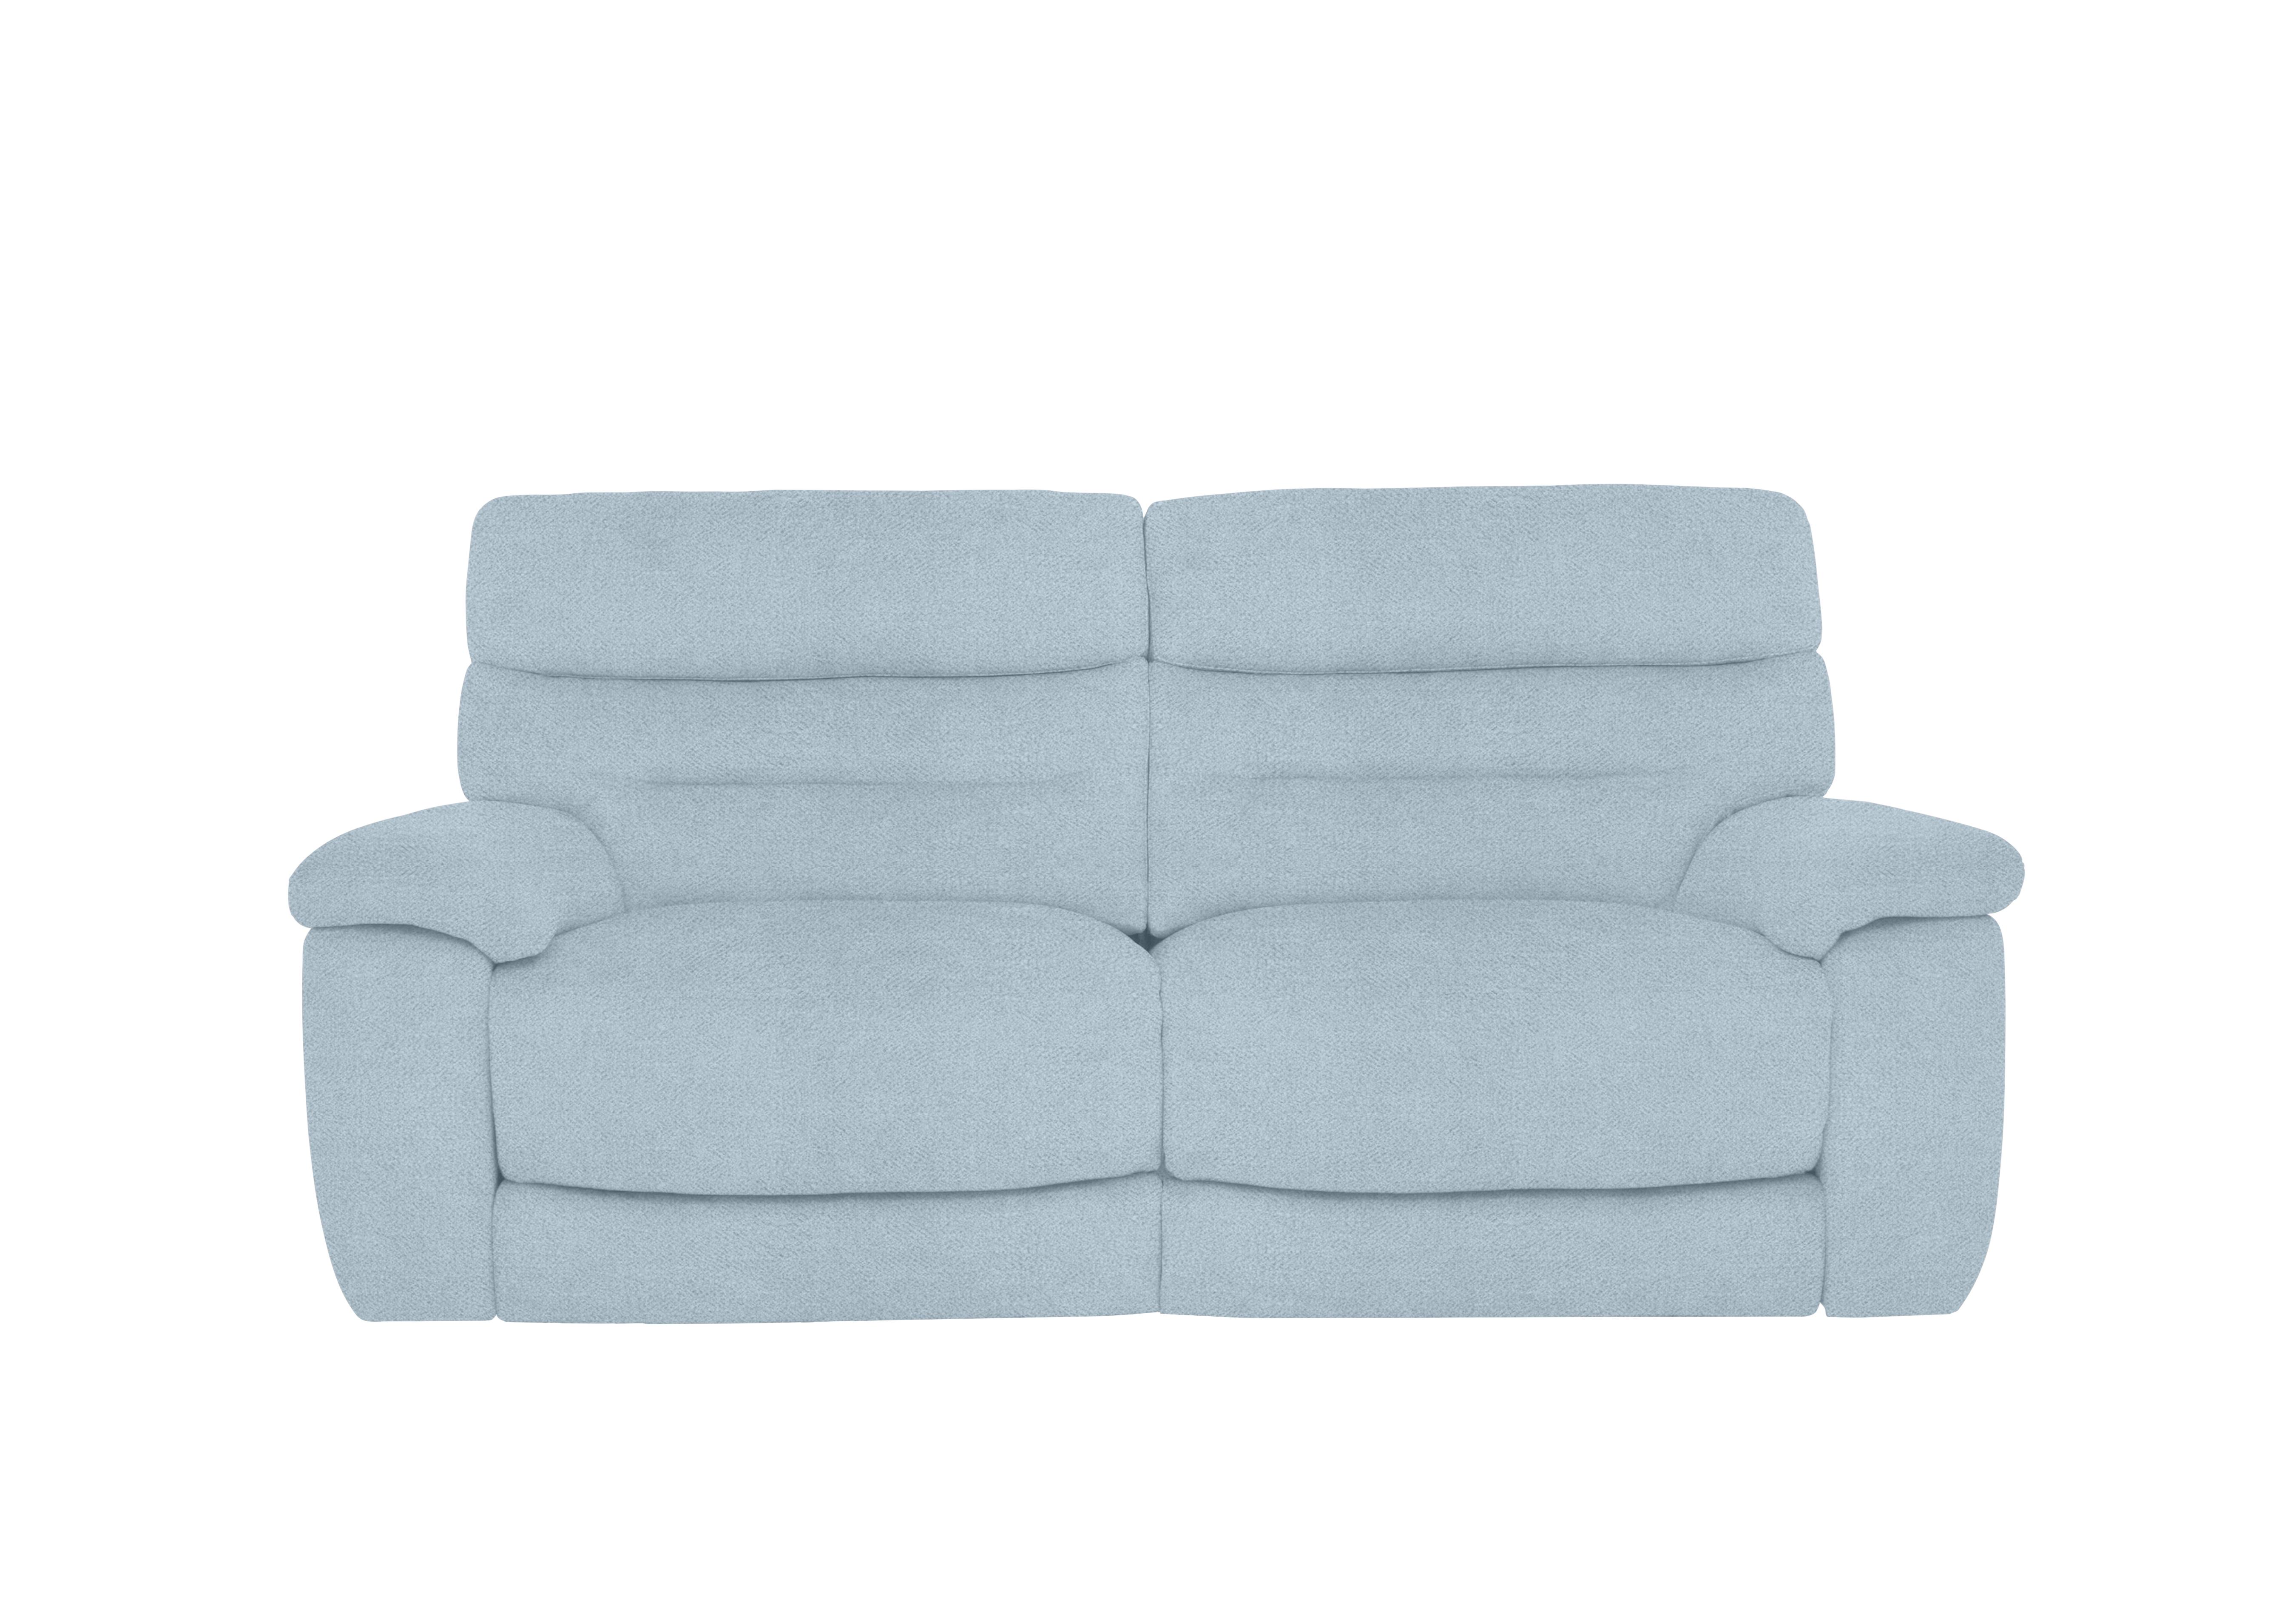 Nimbus 3 Seater Fabric Power Recliner Sofa with Power Headrests and Power Lumbar in Fab-Meo-R17 Baby Blue on Furniture Village